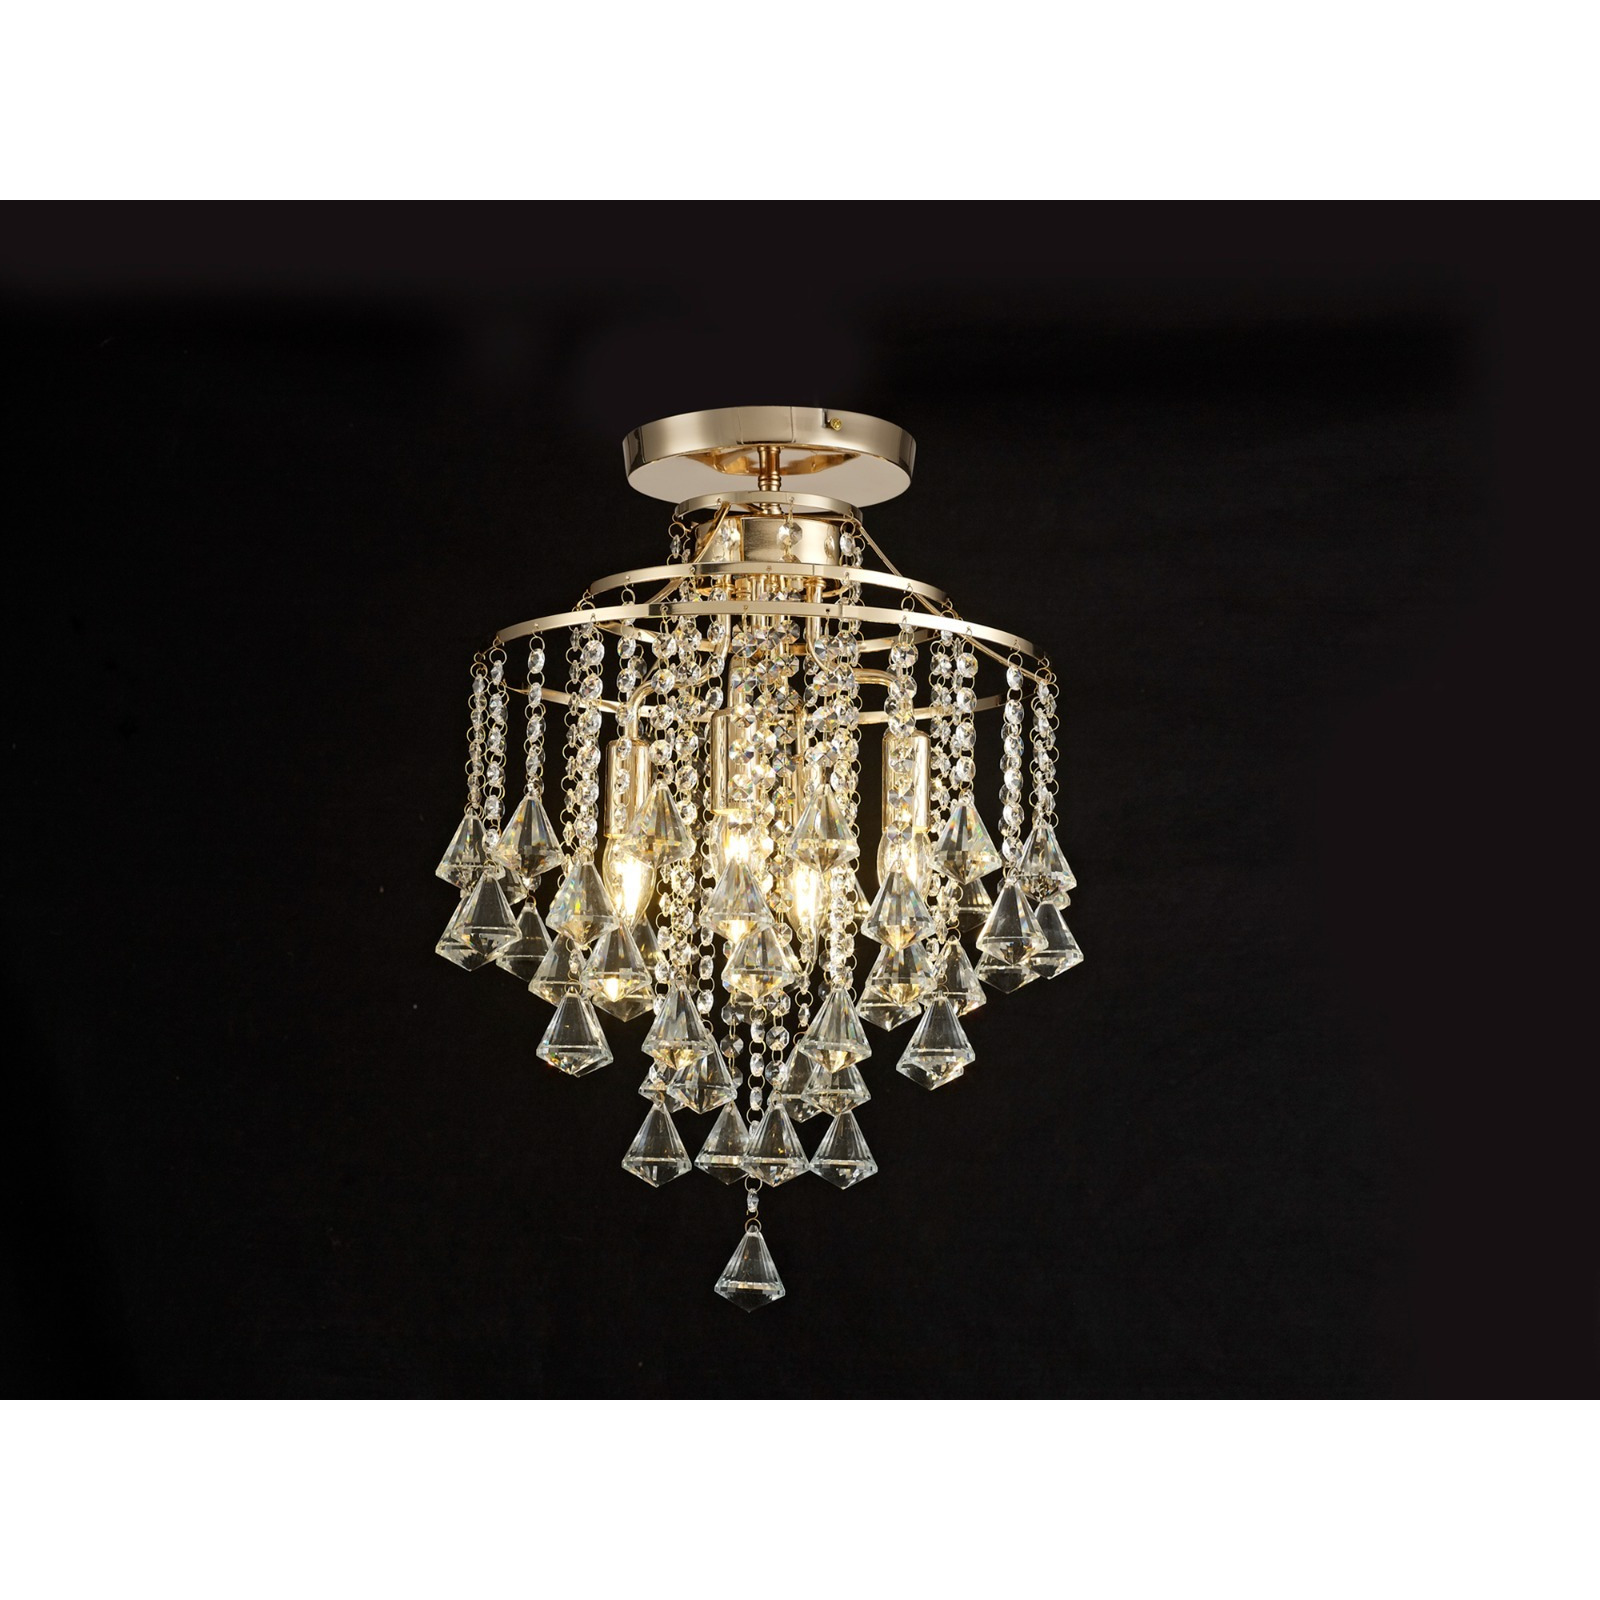 Diyas IL32770 Inina 4 Light Ceiling Light In French Gold